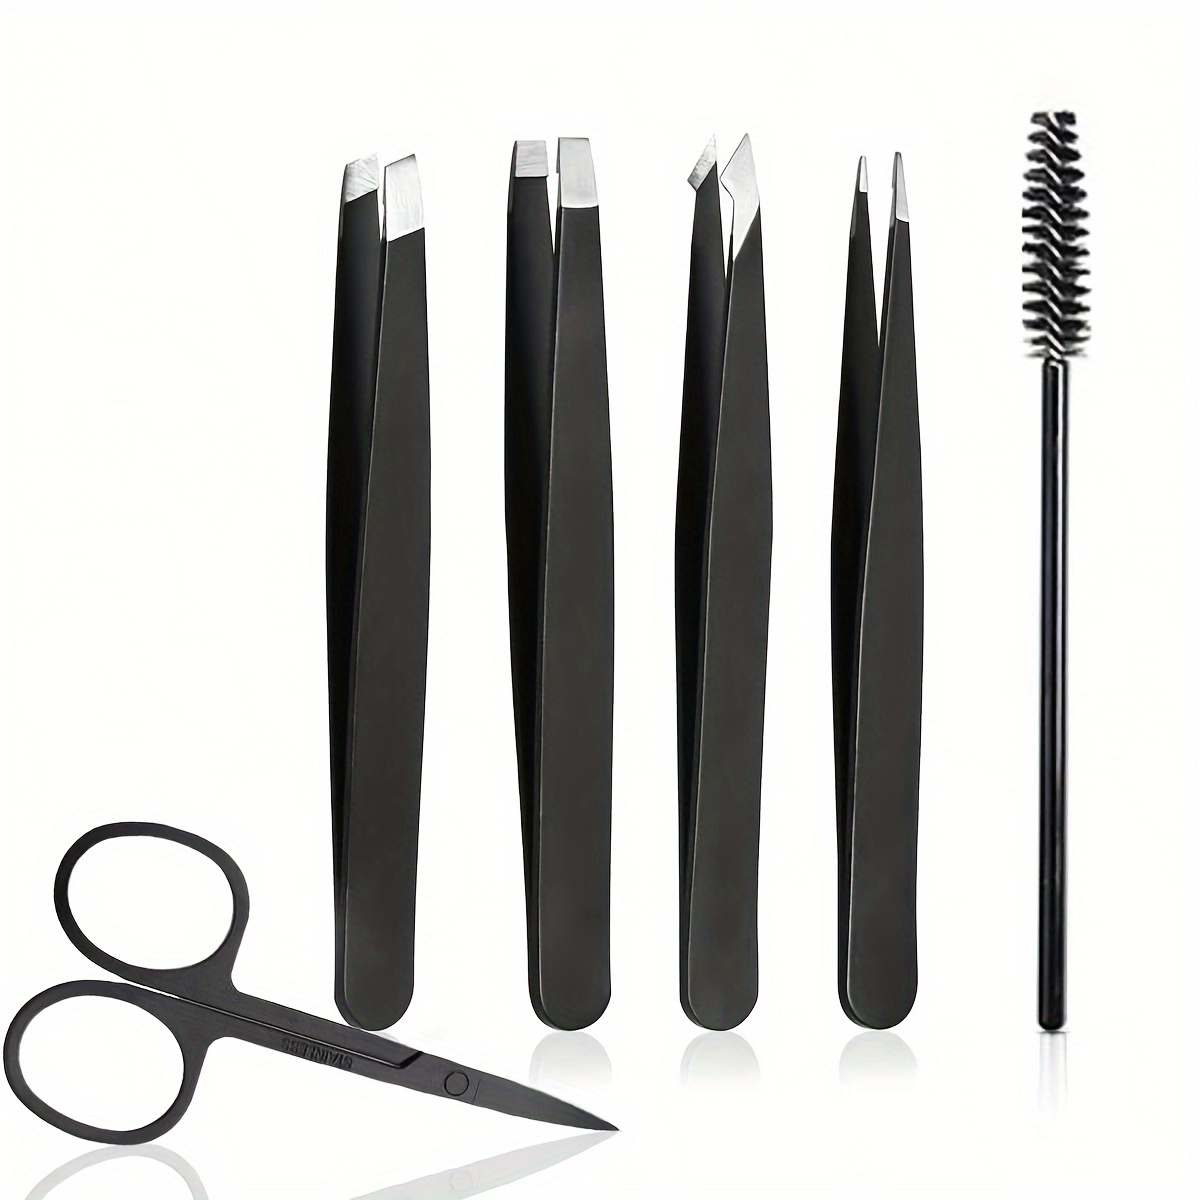 

6pcs Precision Eyebrow Grooming Kit - Stainless Steel Tweezers Set With Curved Scissors And Eyelash Brush, Slant, Pointed, Flat, Angle Tips For Effective Facial Hair Removal And Eyebrow Shaping